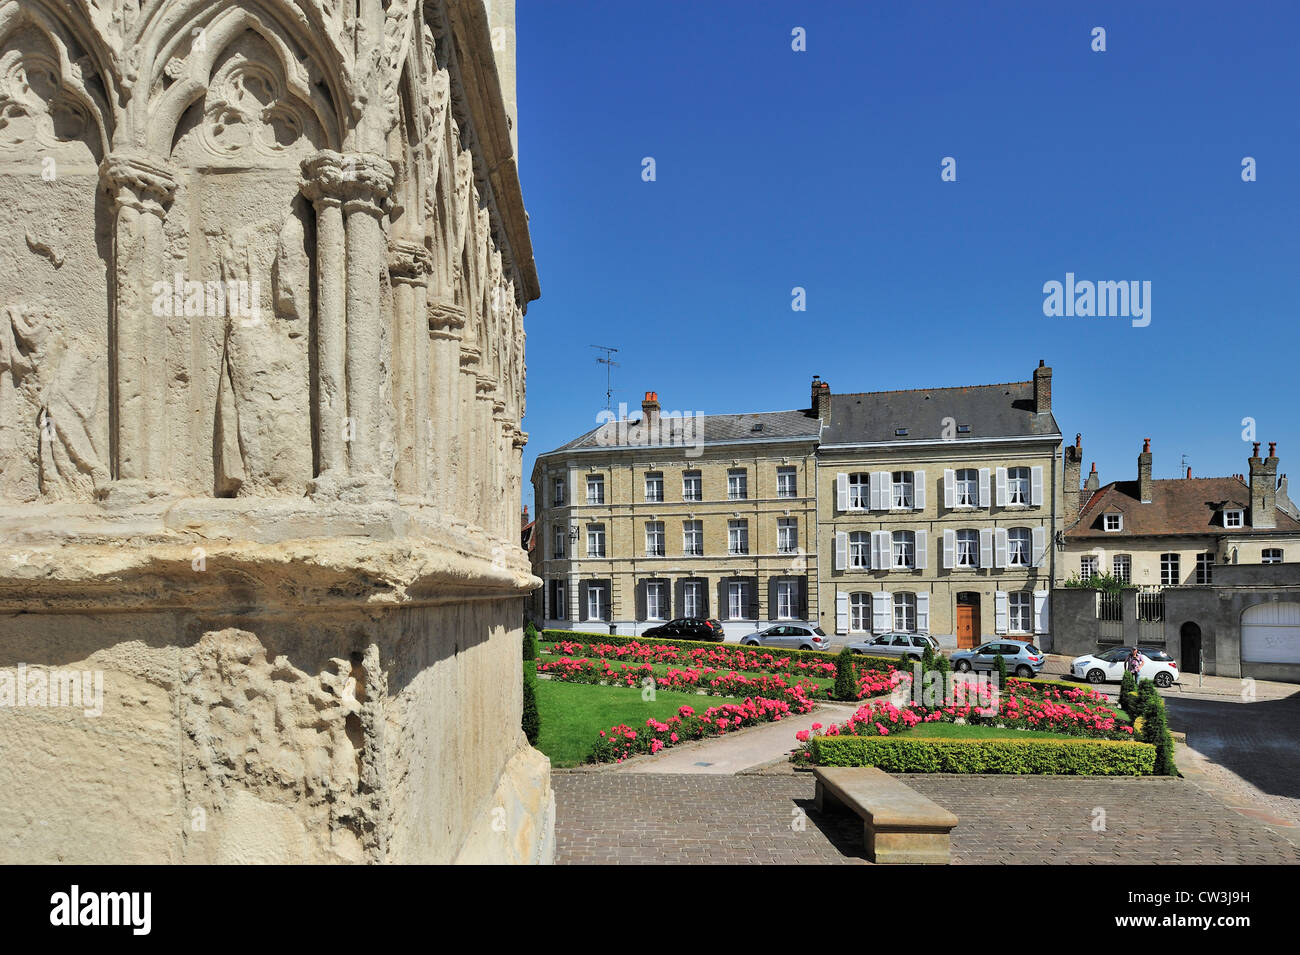 Detail of the Saint-Omer Cathedral / Cathédrale Notre-Dame de Saint-Omer at Sint-Omaars, Nord-Pas-de-Calais, France Stock Photo